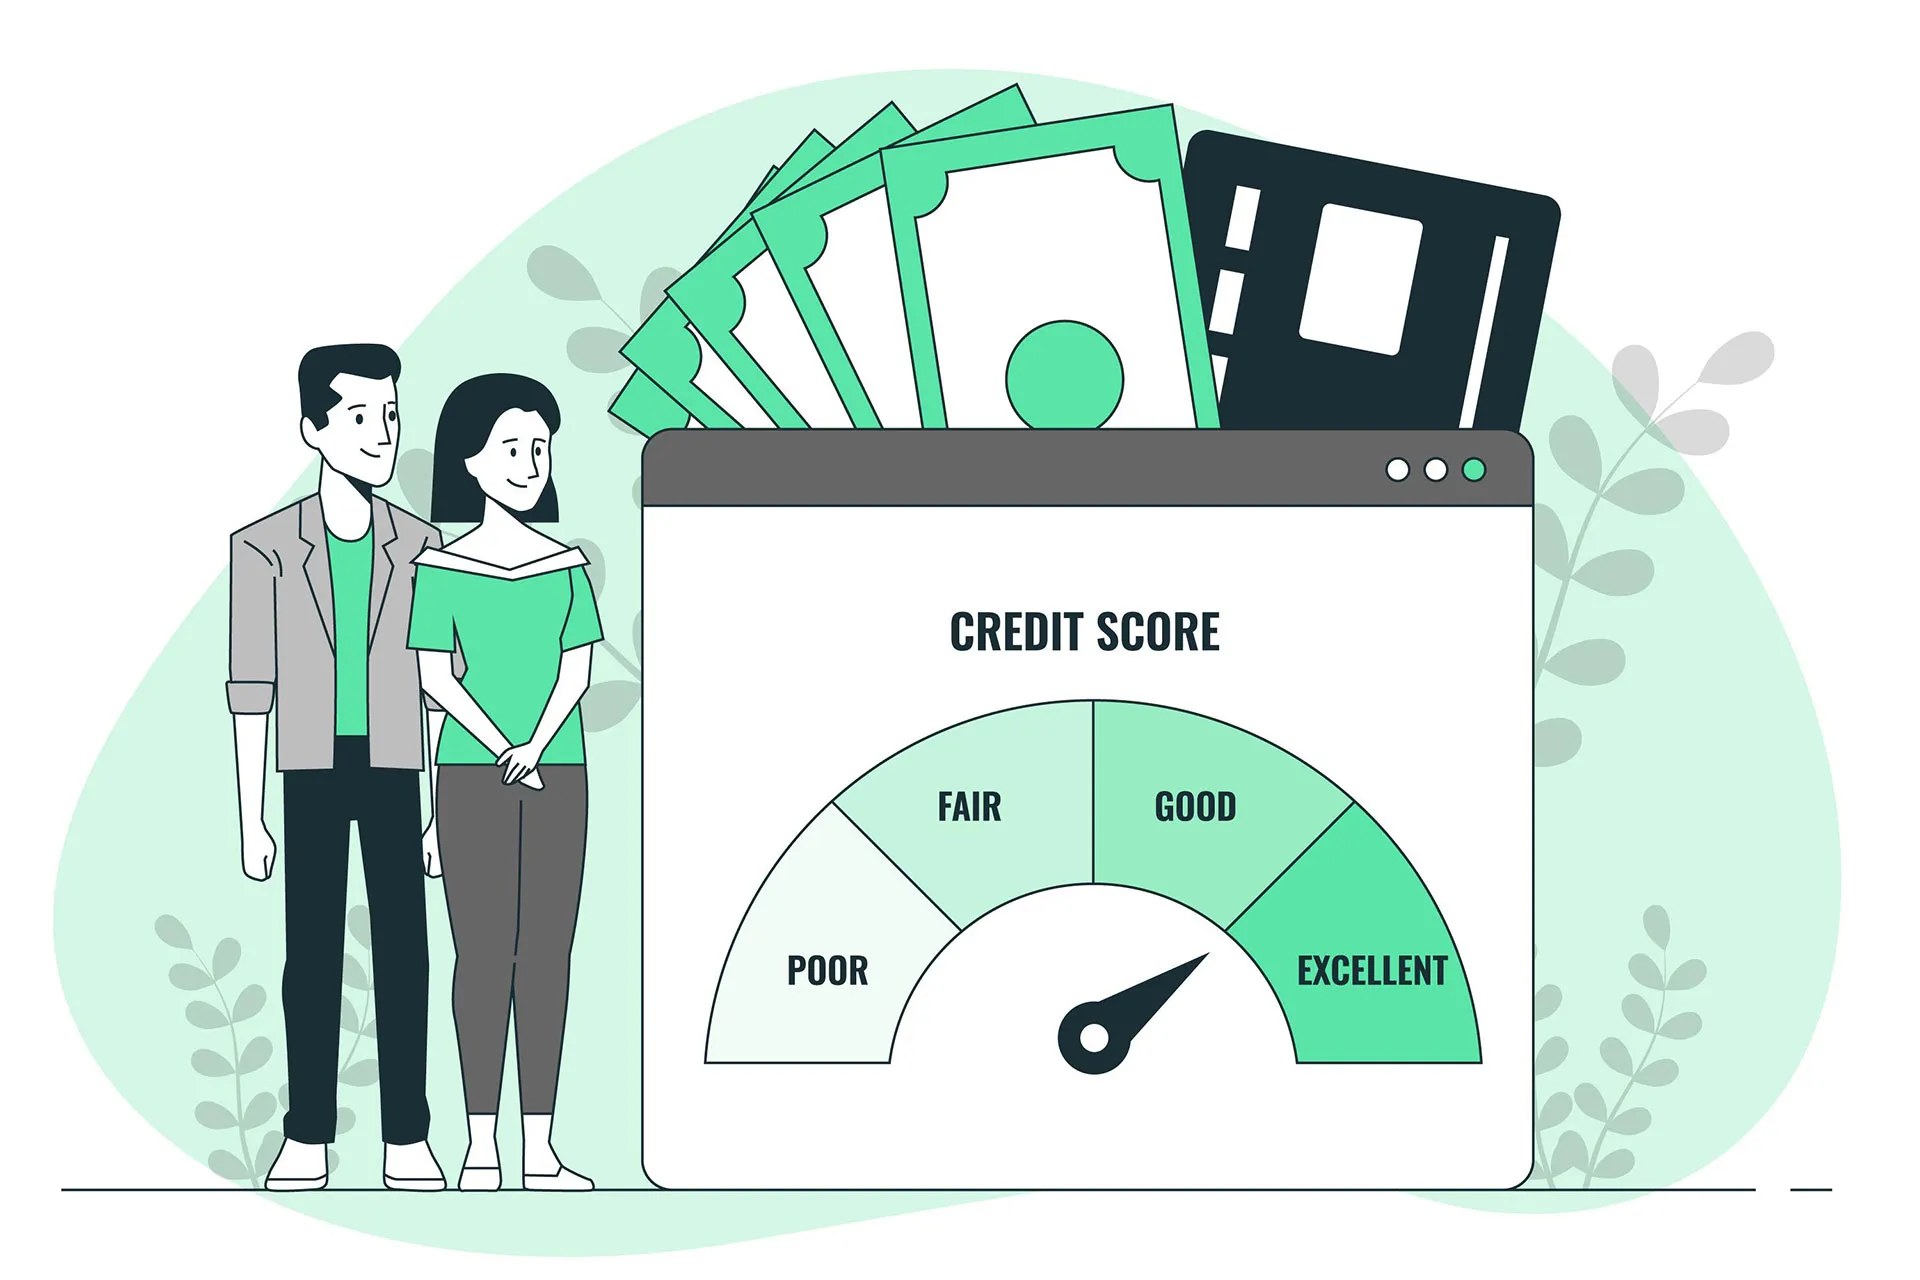 How to Get an 841 Credit Score